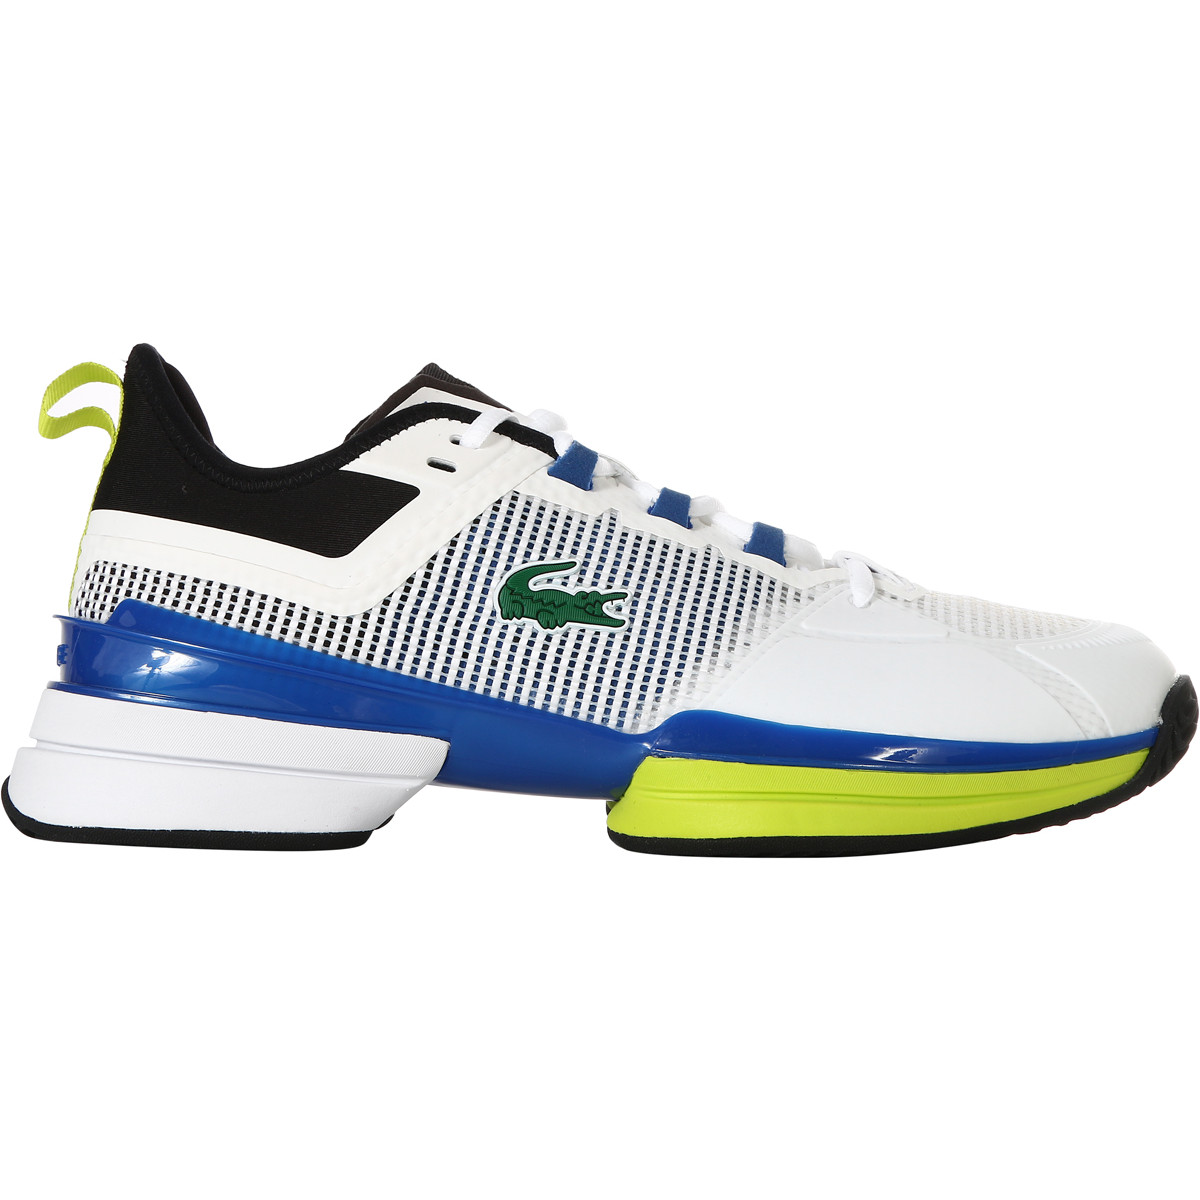 Chaussures Lacoste homme – Chaussures Croteau